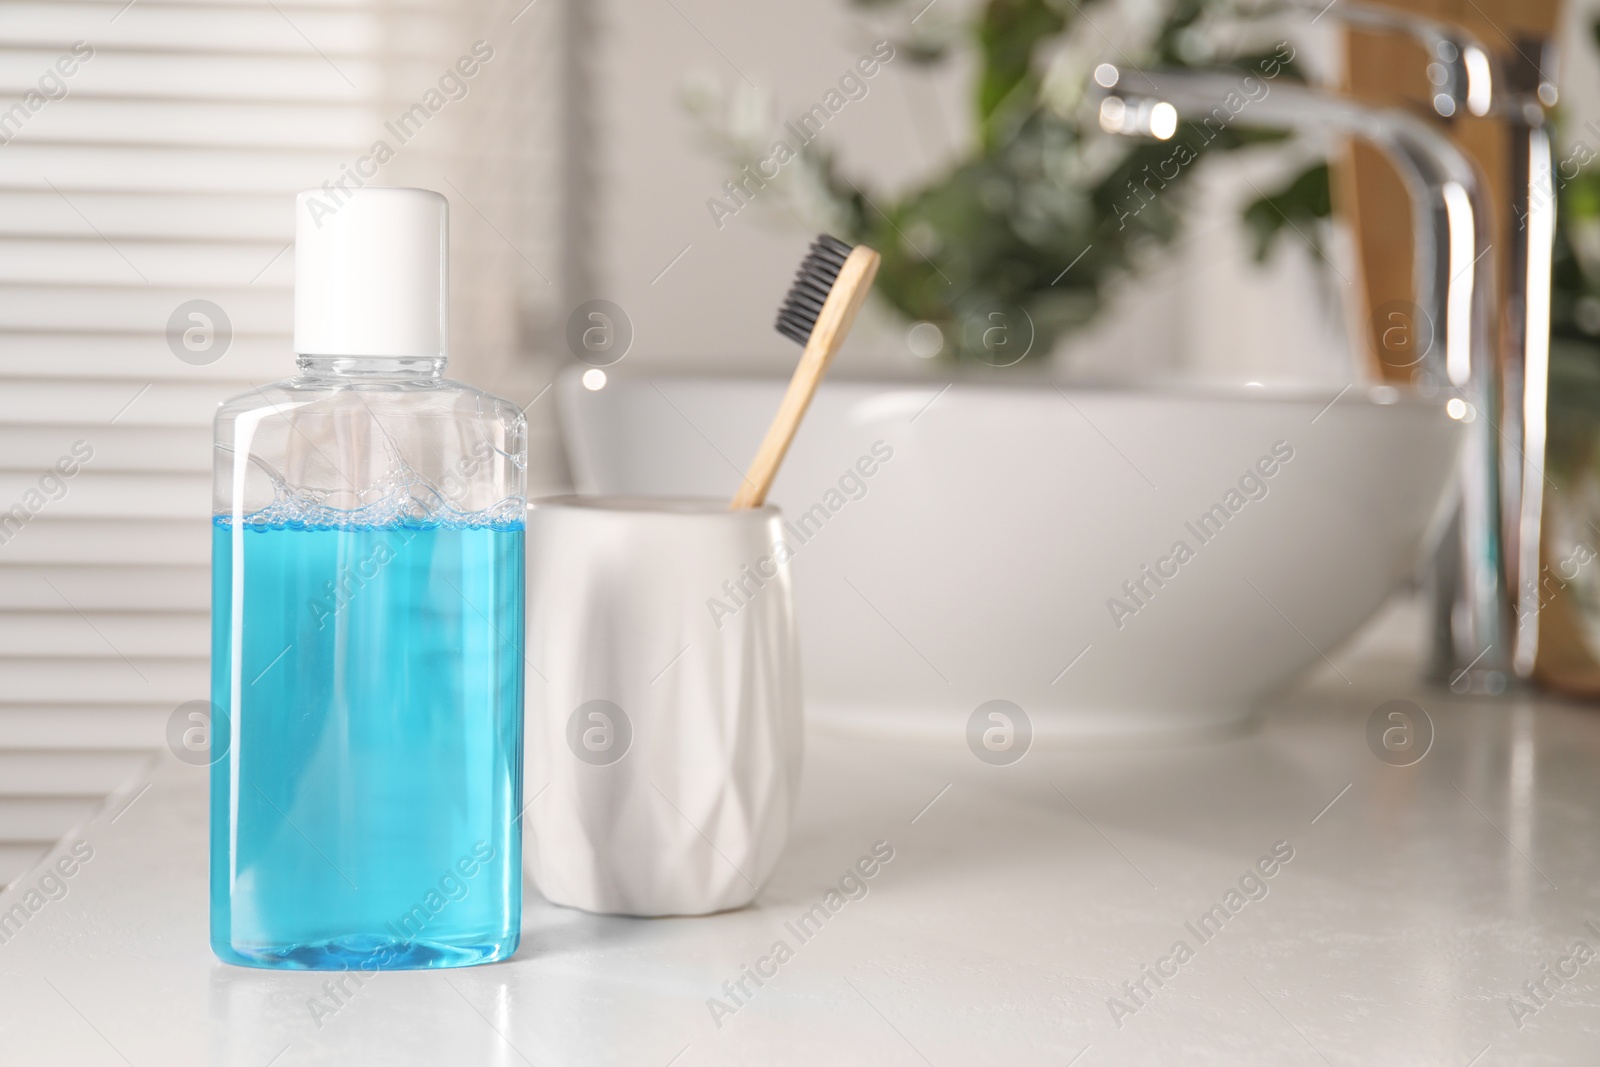 Photo of Bottle of mouthwash and toothbrush on white countertop in bathroom